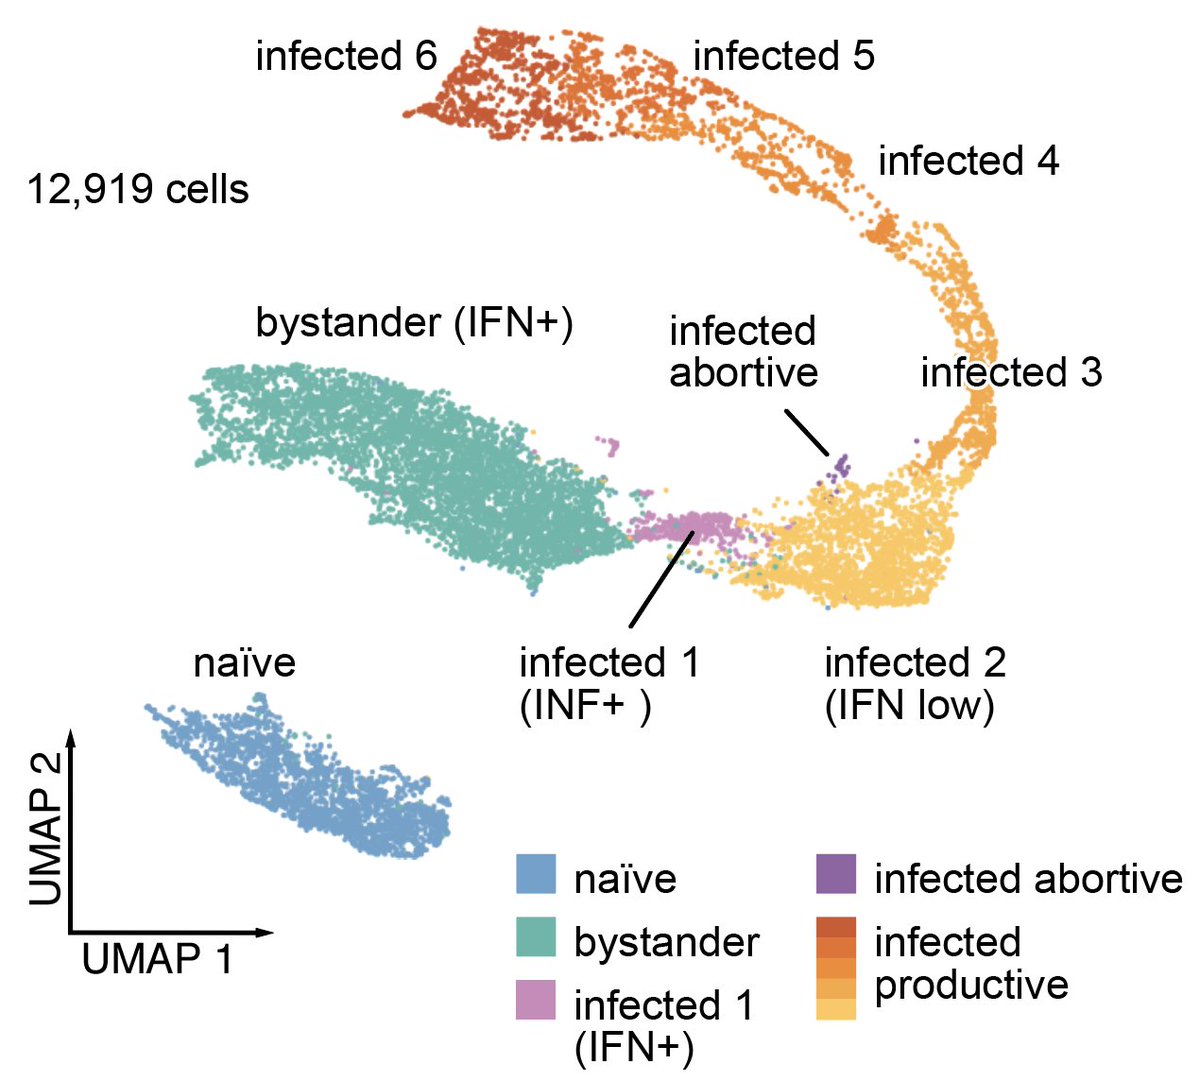 8/ First we needed a baseline for how HCMV infection progresses at the single-cell level. I'll do a separate thread on this. The gist is: fibroblasts can be either naïve, in a bystander state (uninfected, strong IFN resp), or infected (expressing viral genes, suppressed IFN resp)